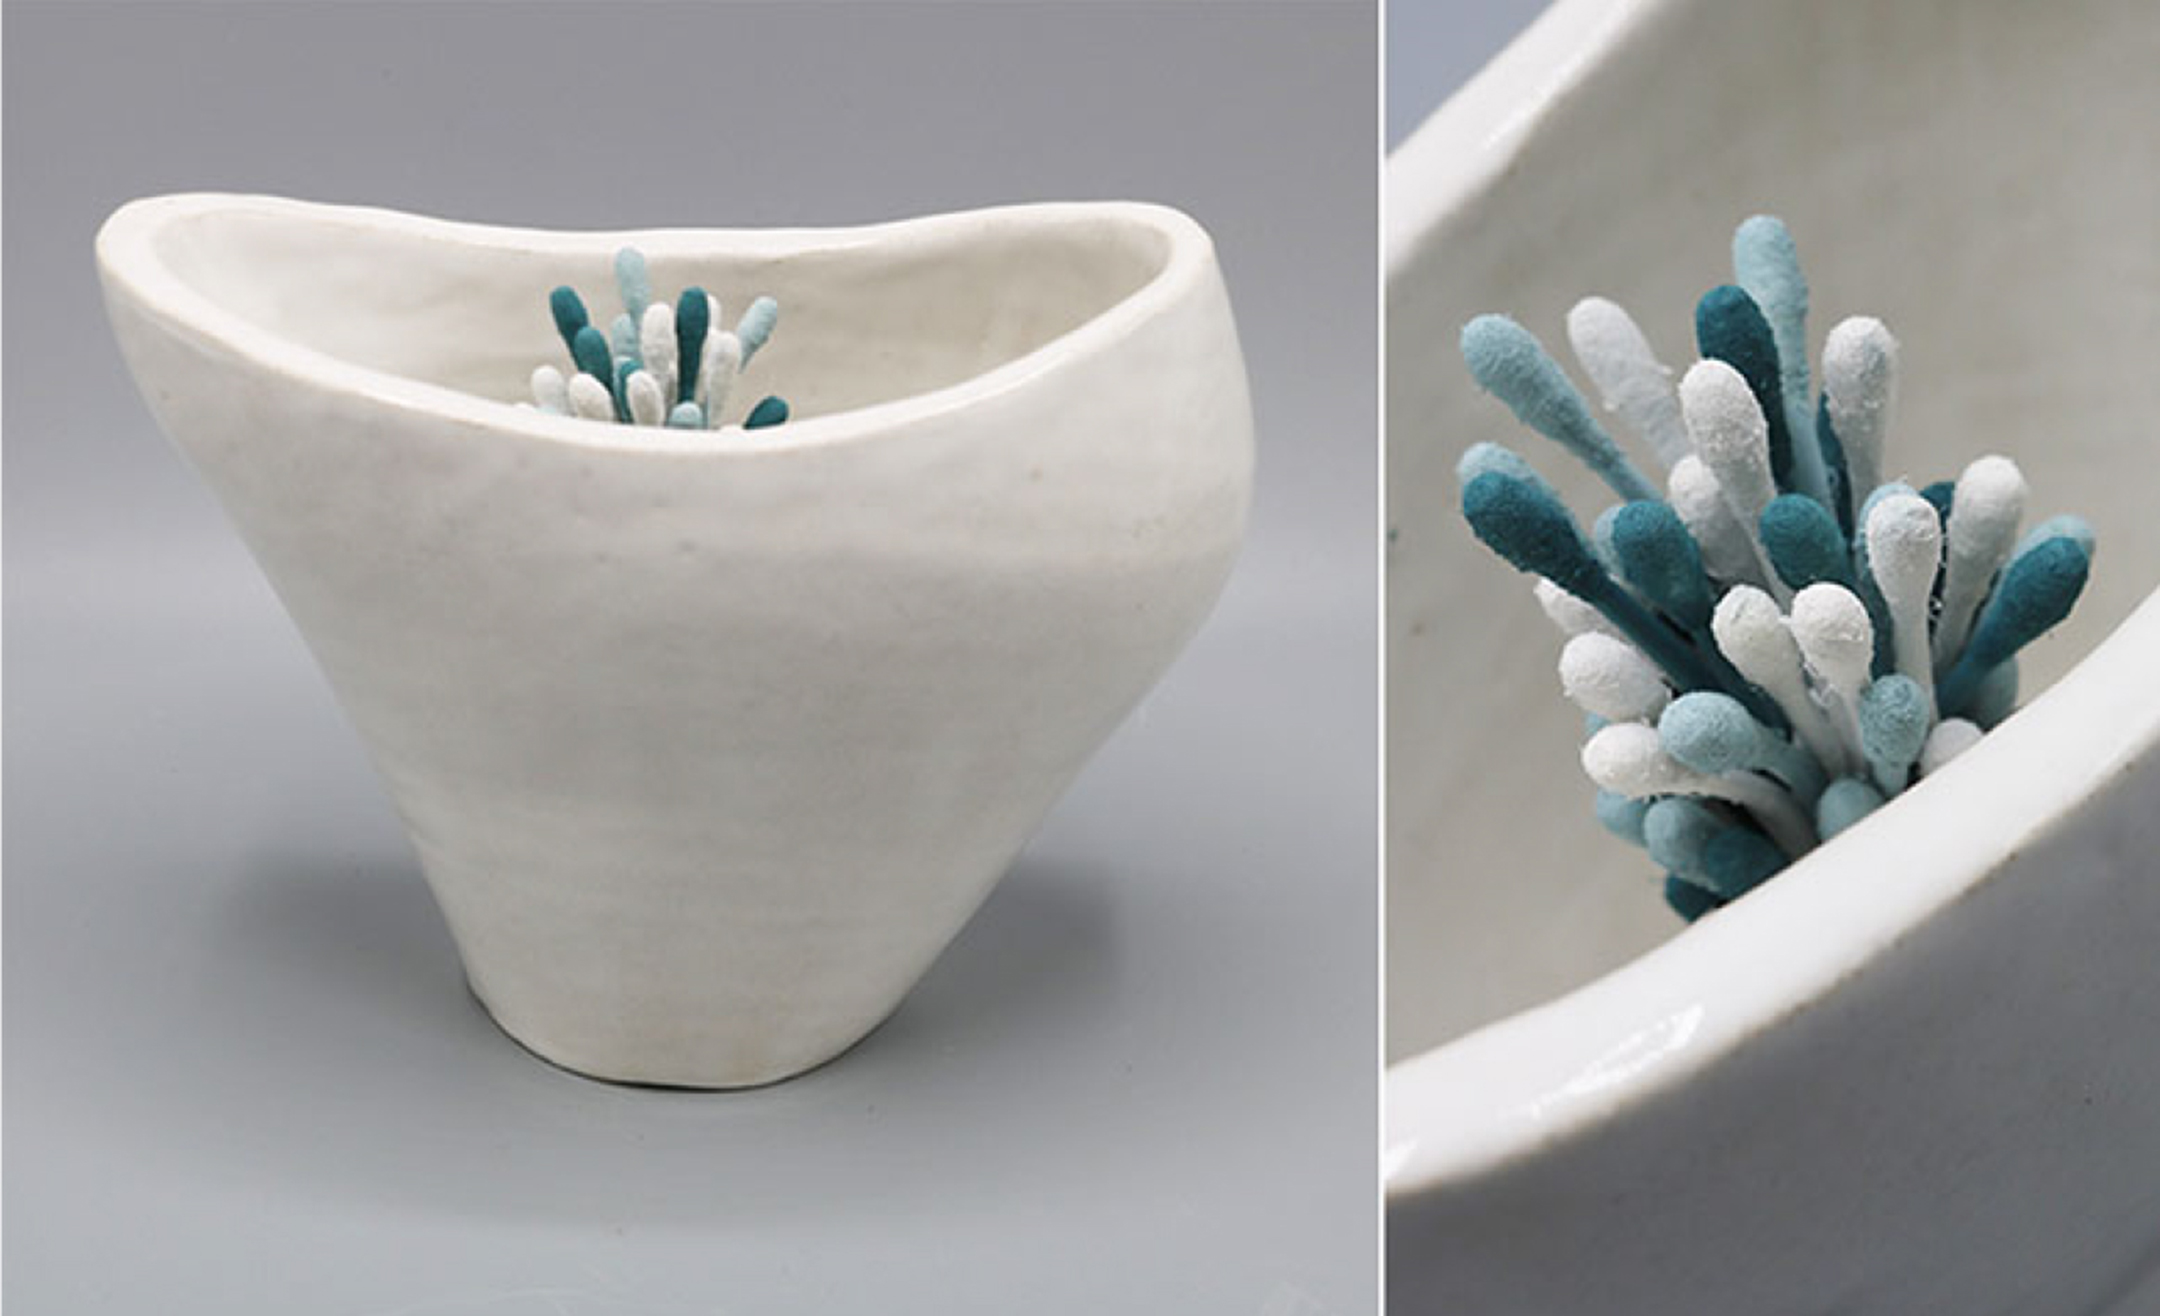 sculpture of a white cup-like object with a small cluster of blue-and-white Q-tips poking out of the top